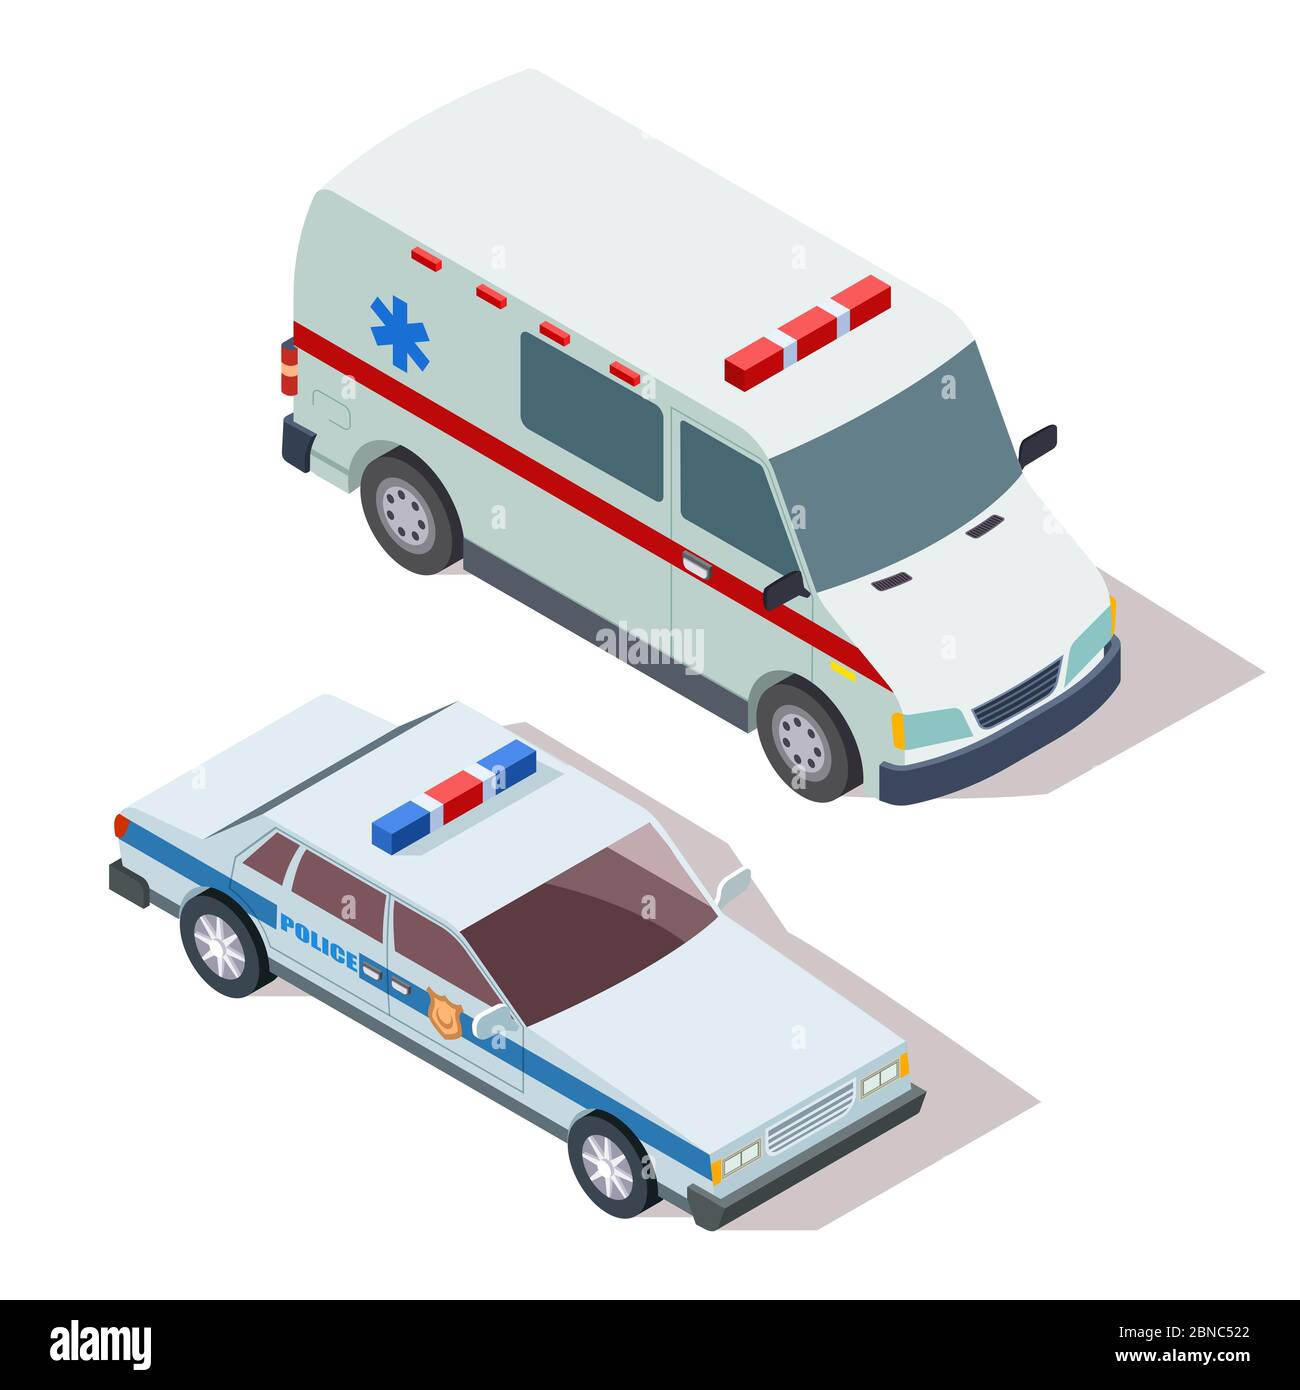 Ambulance and police cars 3d isometric vector isolated on white background illustration Stock Vector